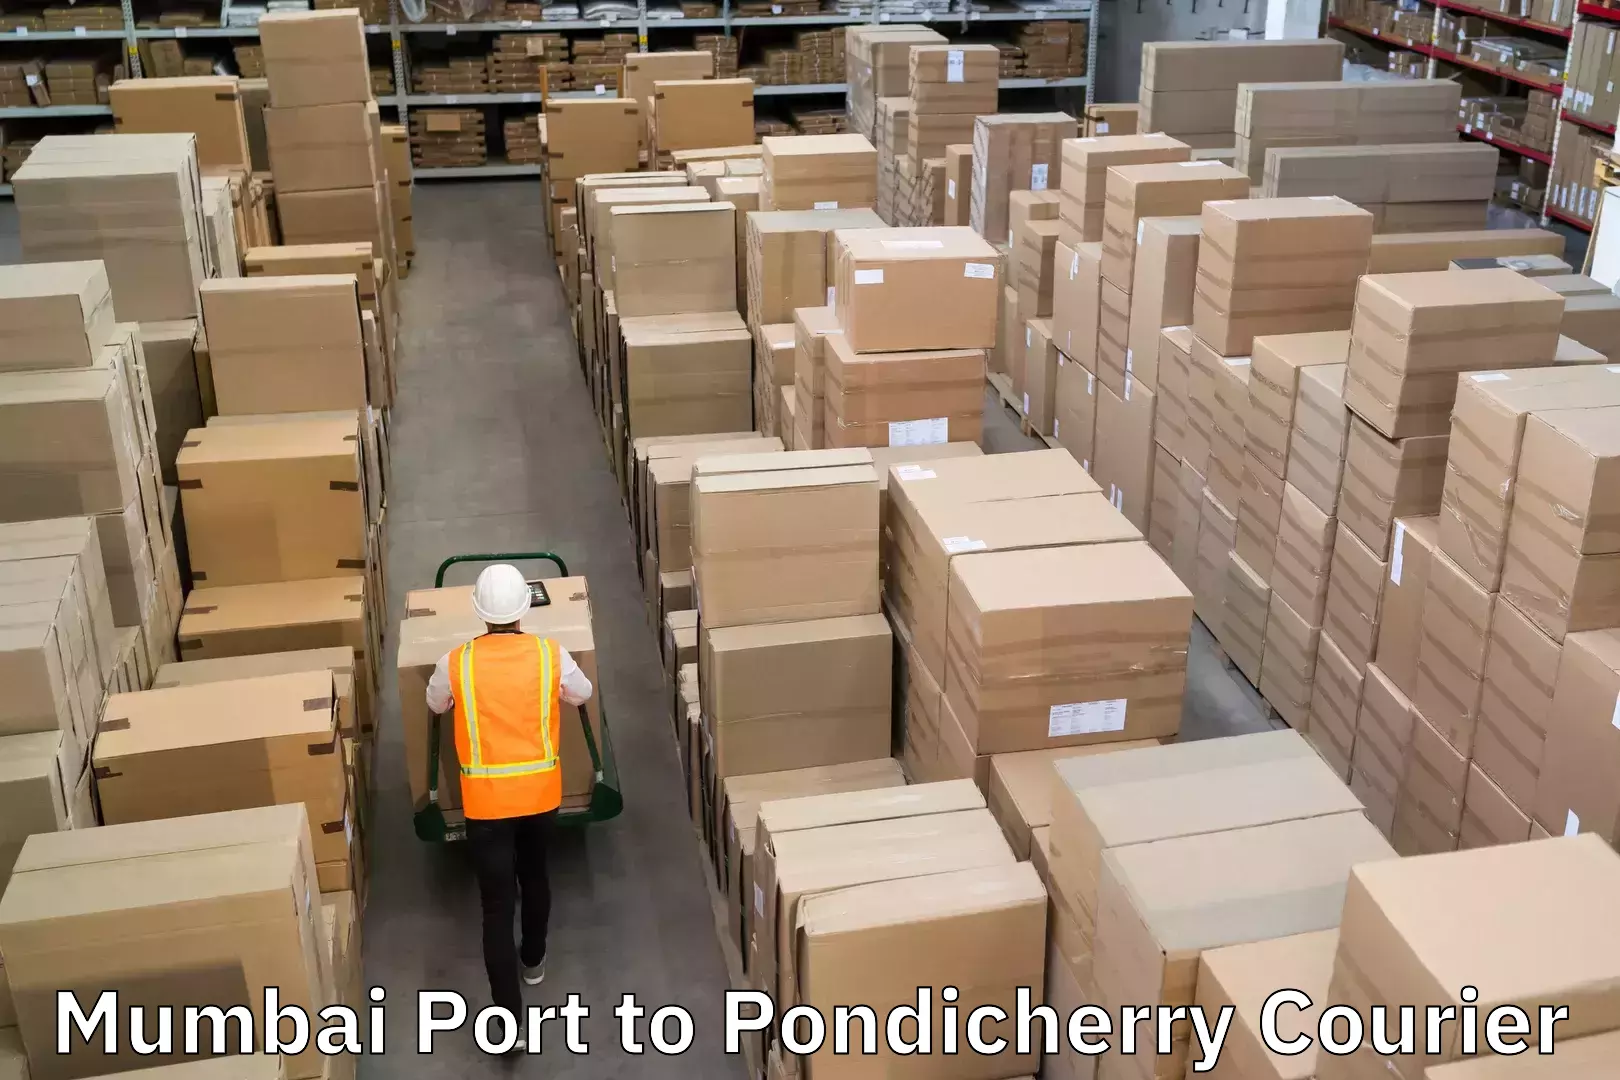 Specialized courier services Mumbai Port to Pondicherry